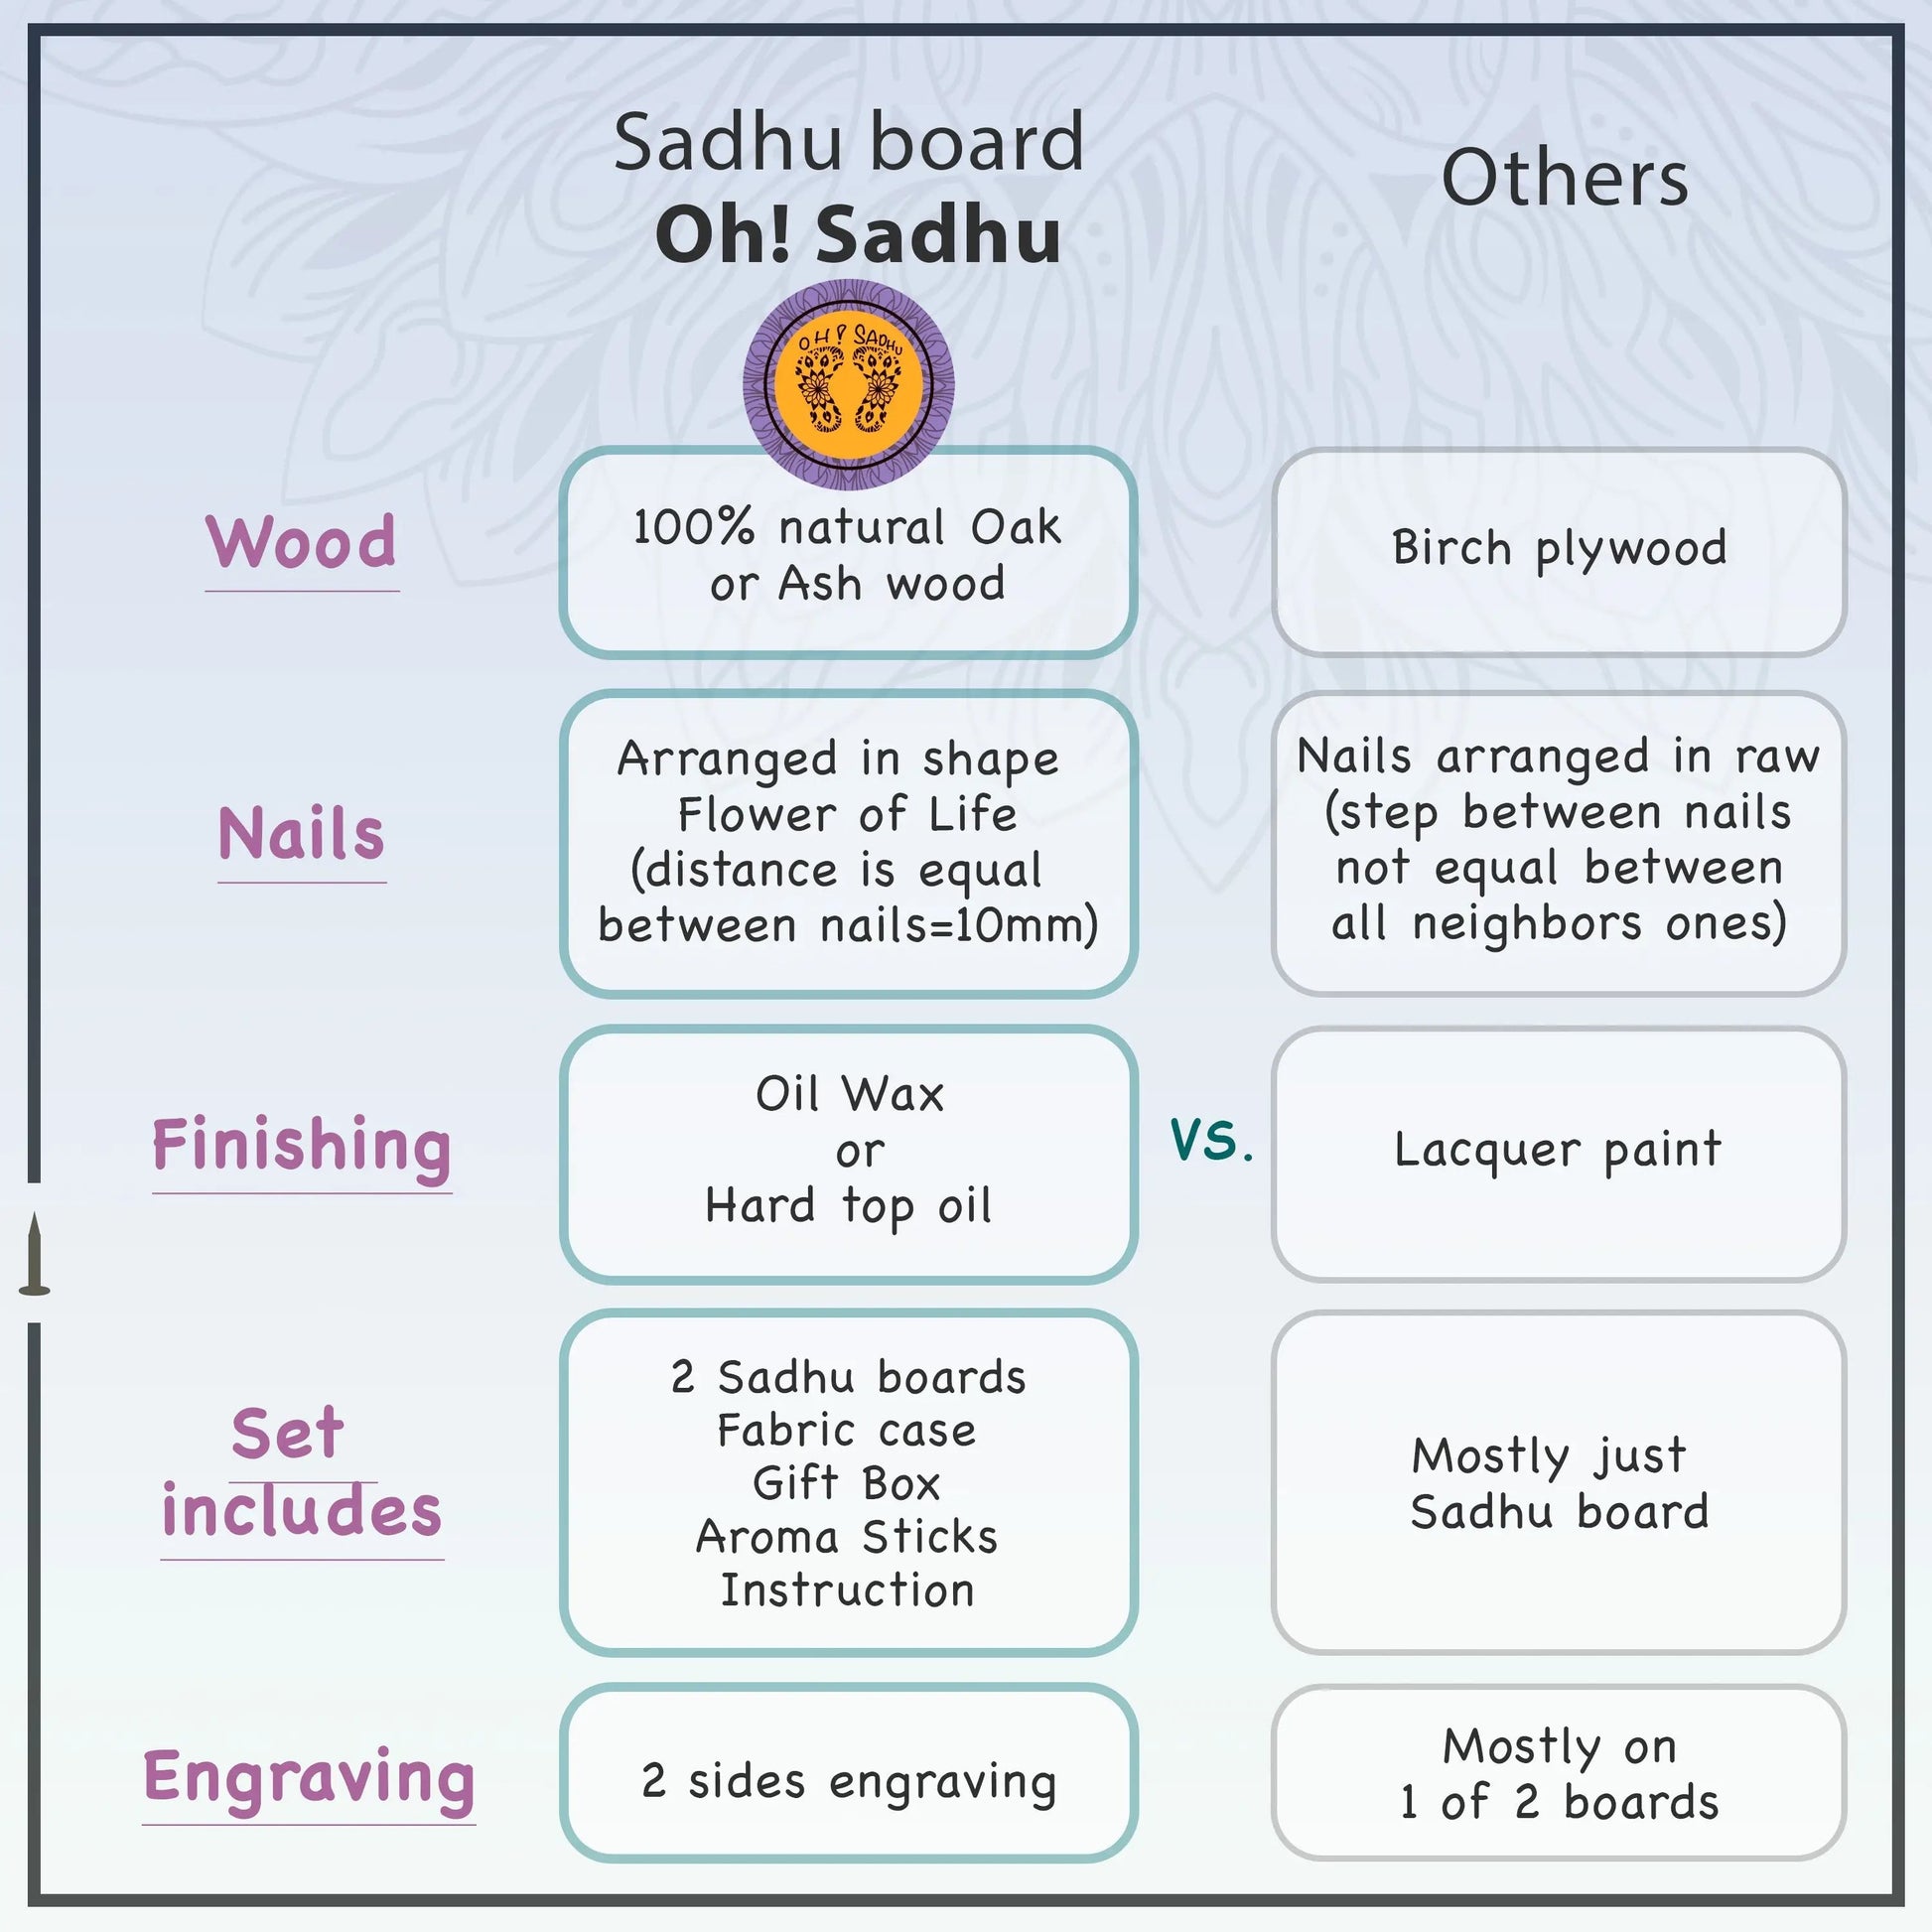 Excellence comparison table of Oh! Sadhu and others